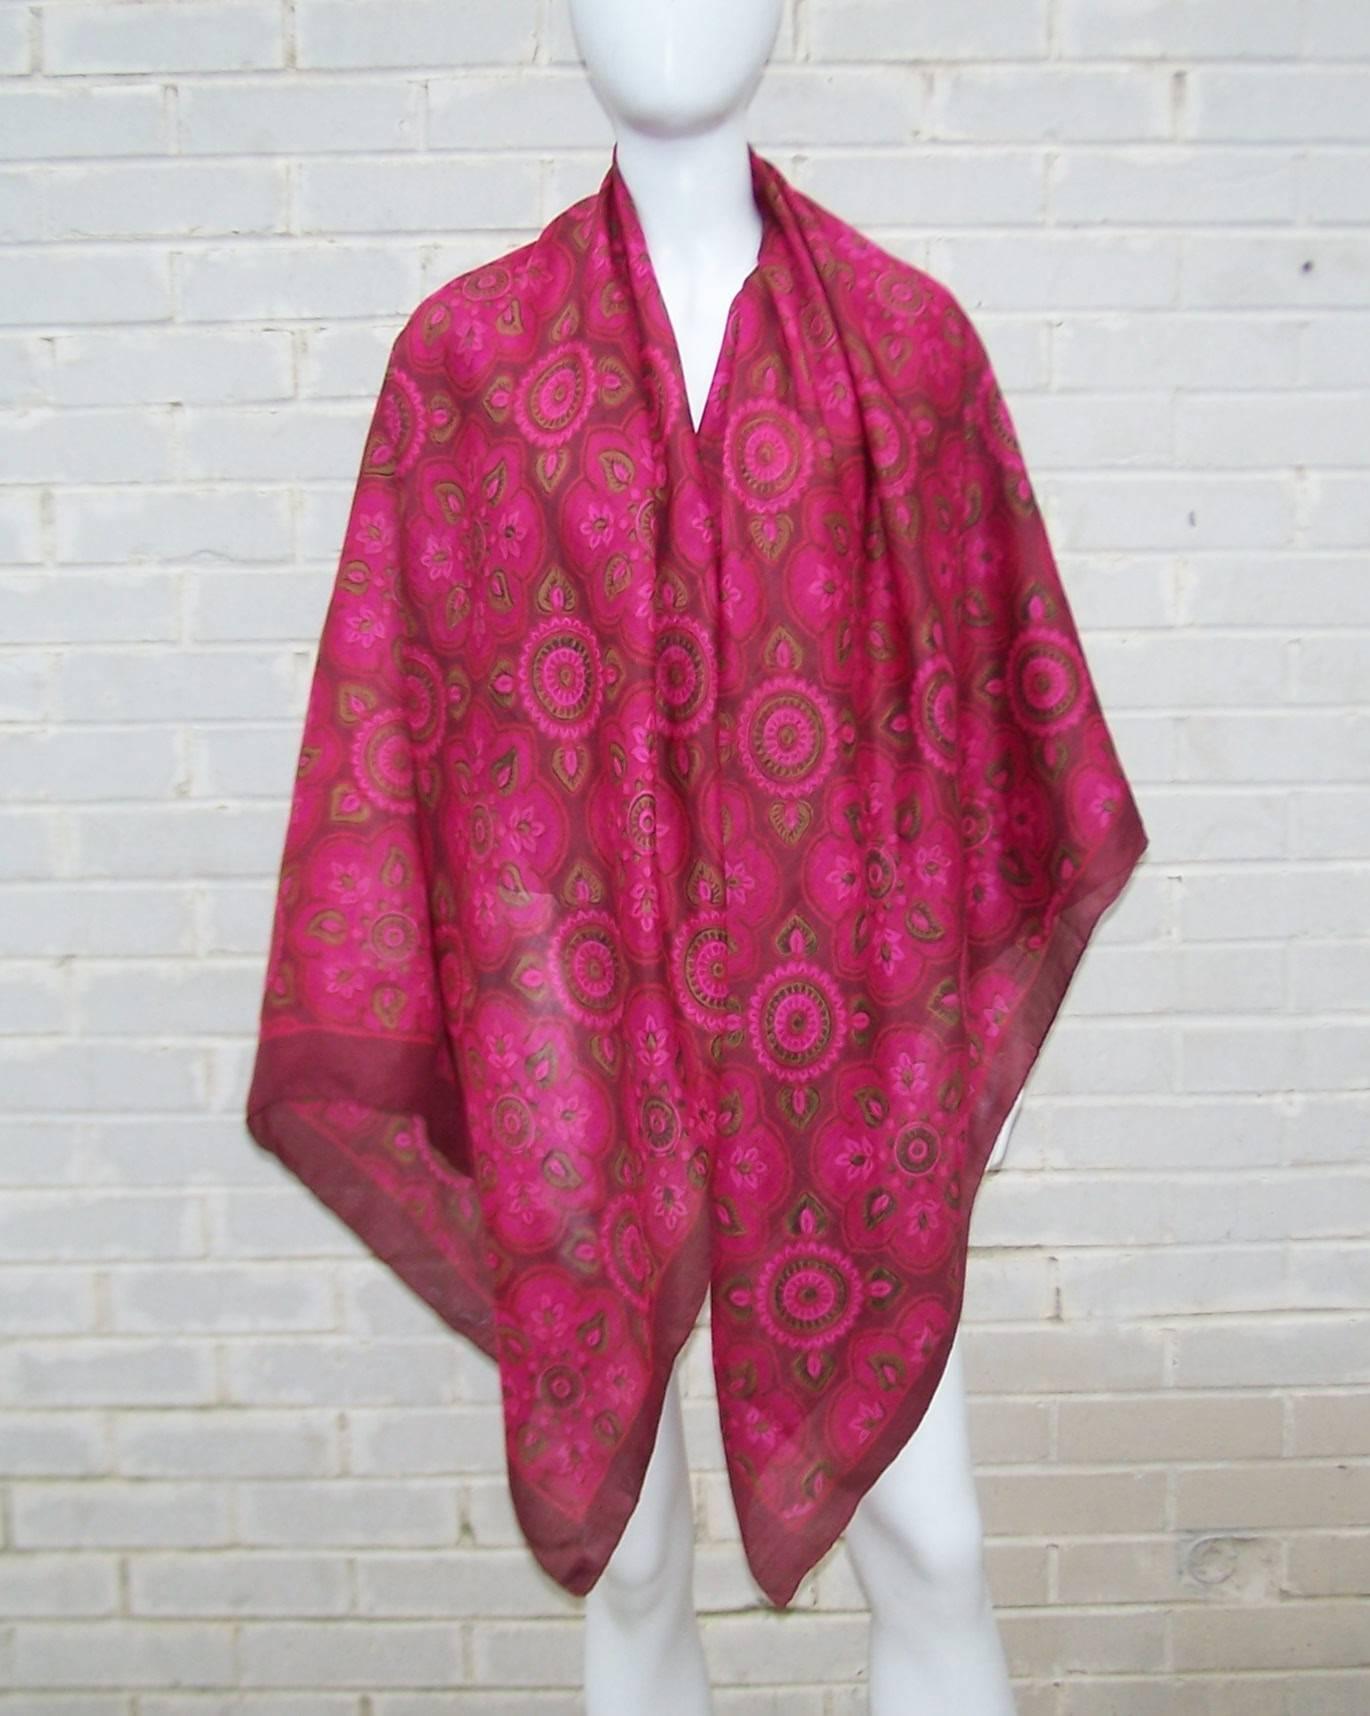 Bold, bright and beautiful!  Just many of the ways to describe this 1970's Pierre Cardin handmade Indian silk scarf.  The large 71.5" x 43.5" rectangular wrap has an exotic benjarong style design incorporating shades of hot pink and green.